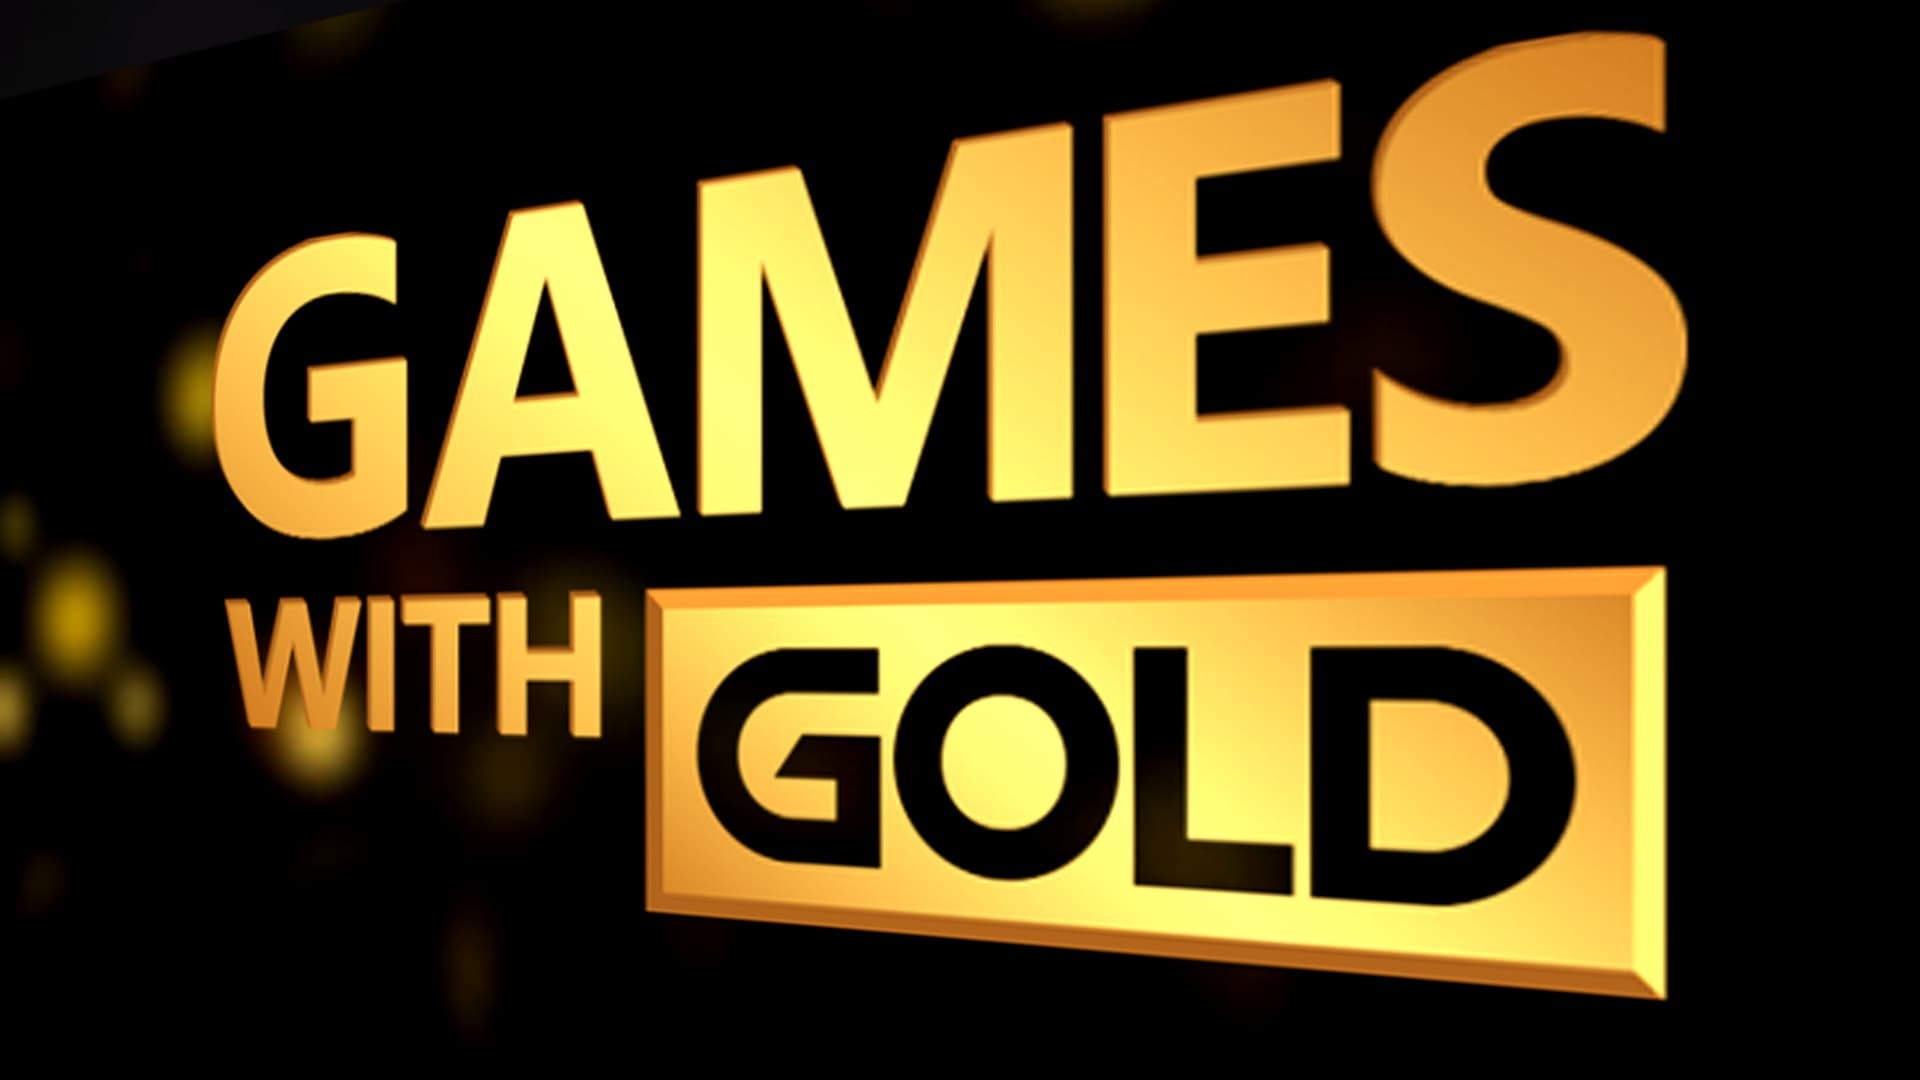 Xbox Games With Gold Logo